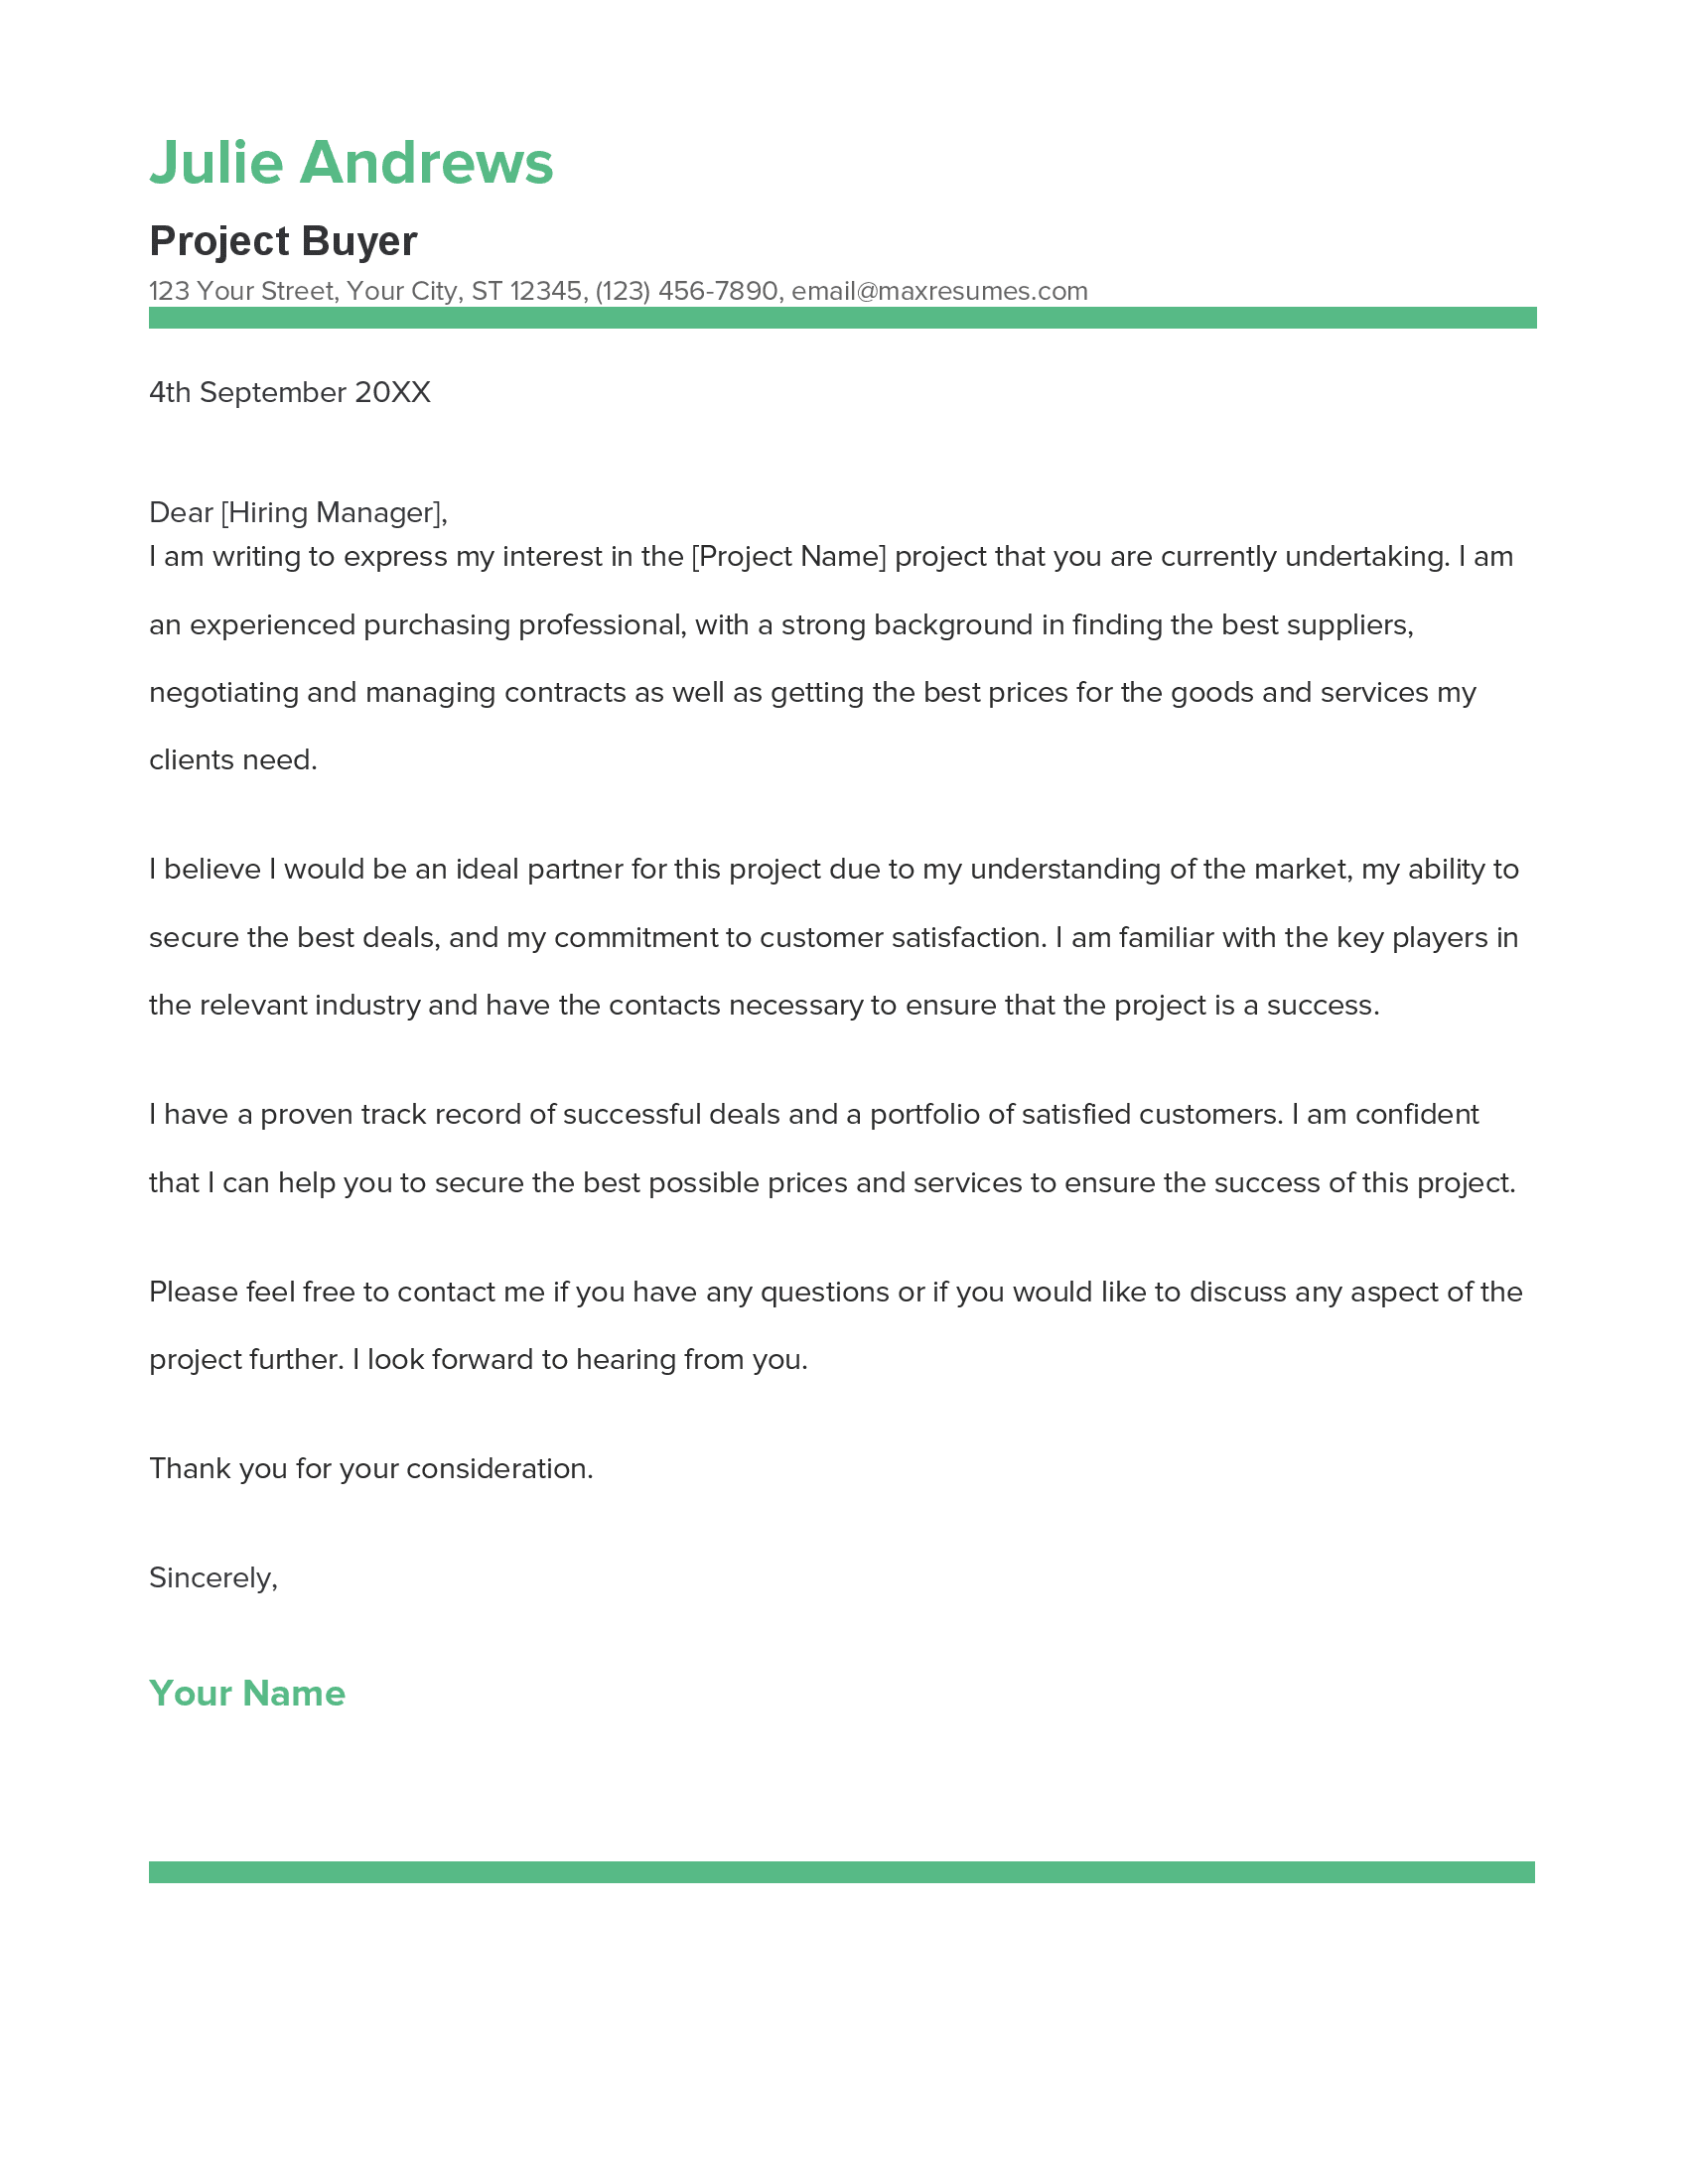 Project Buyer Cover Letter Example